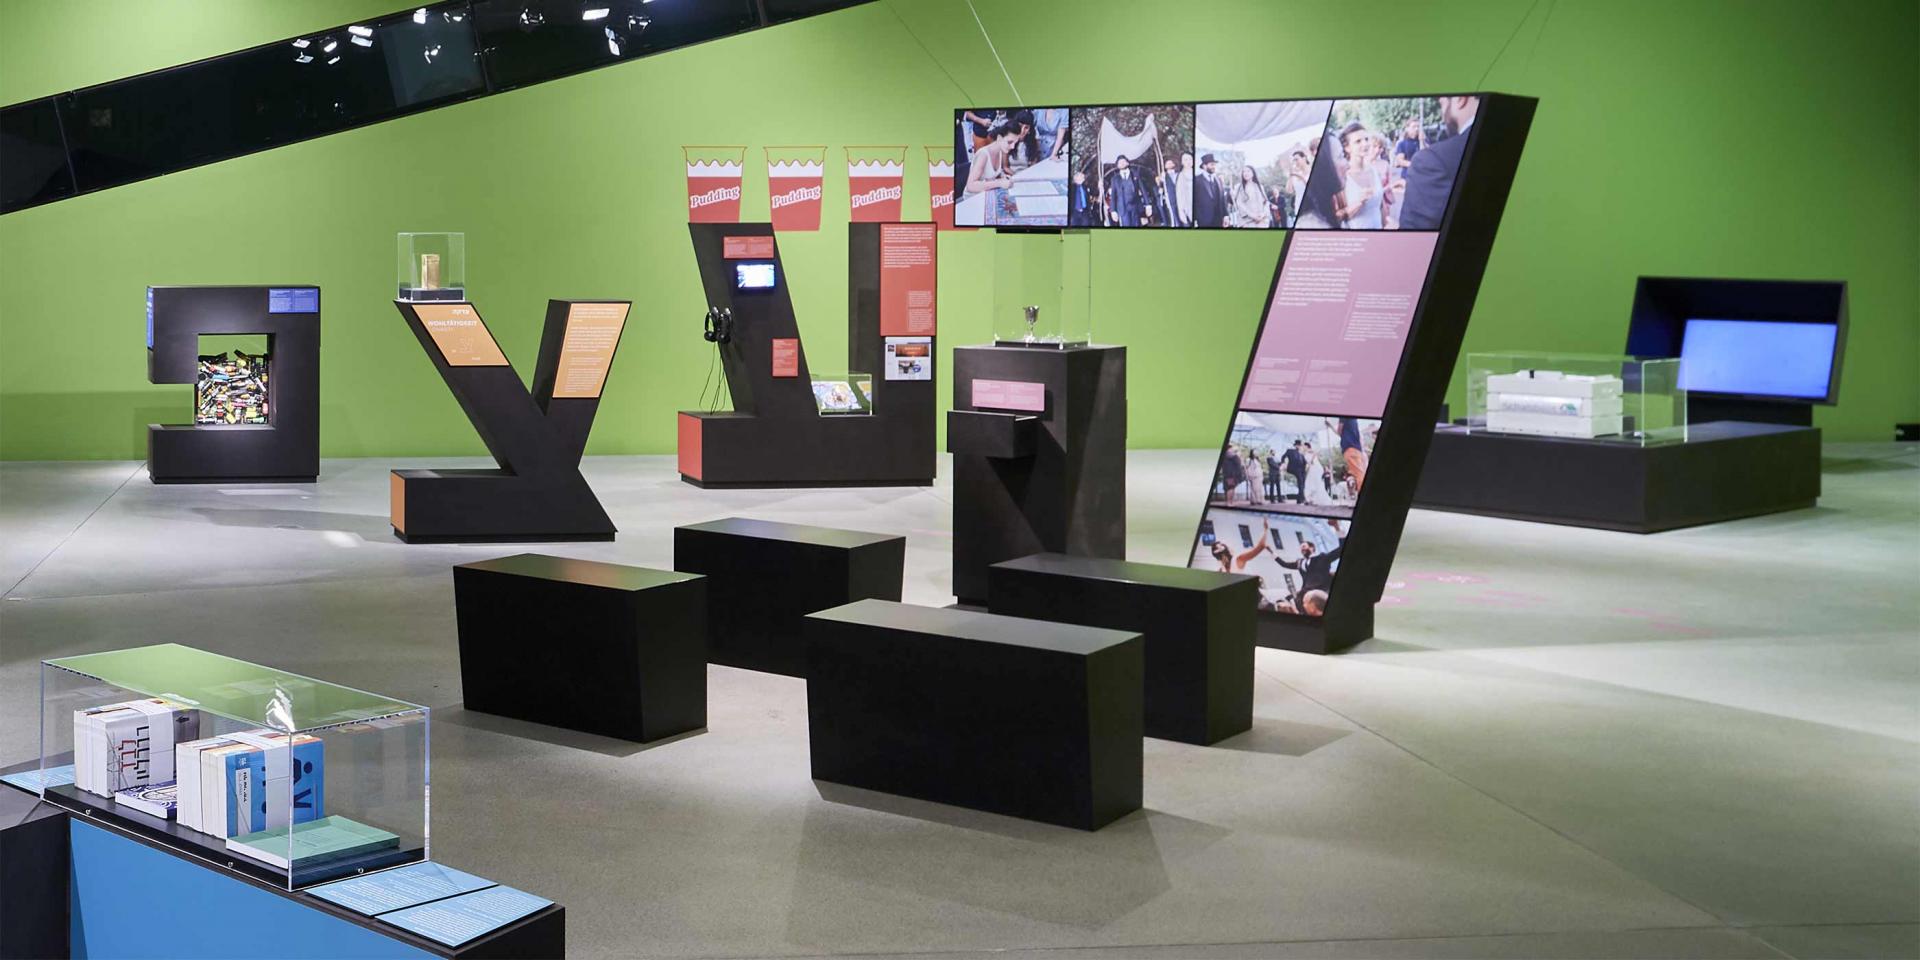 View of an exhibition hall with vitrines in form of huge Hebrew letters